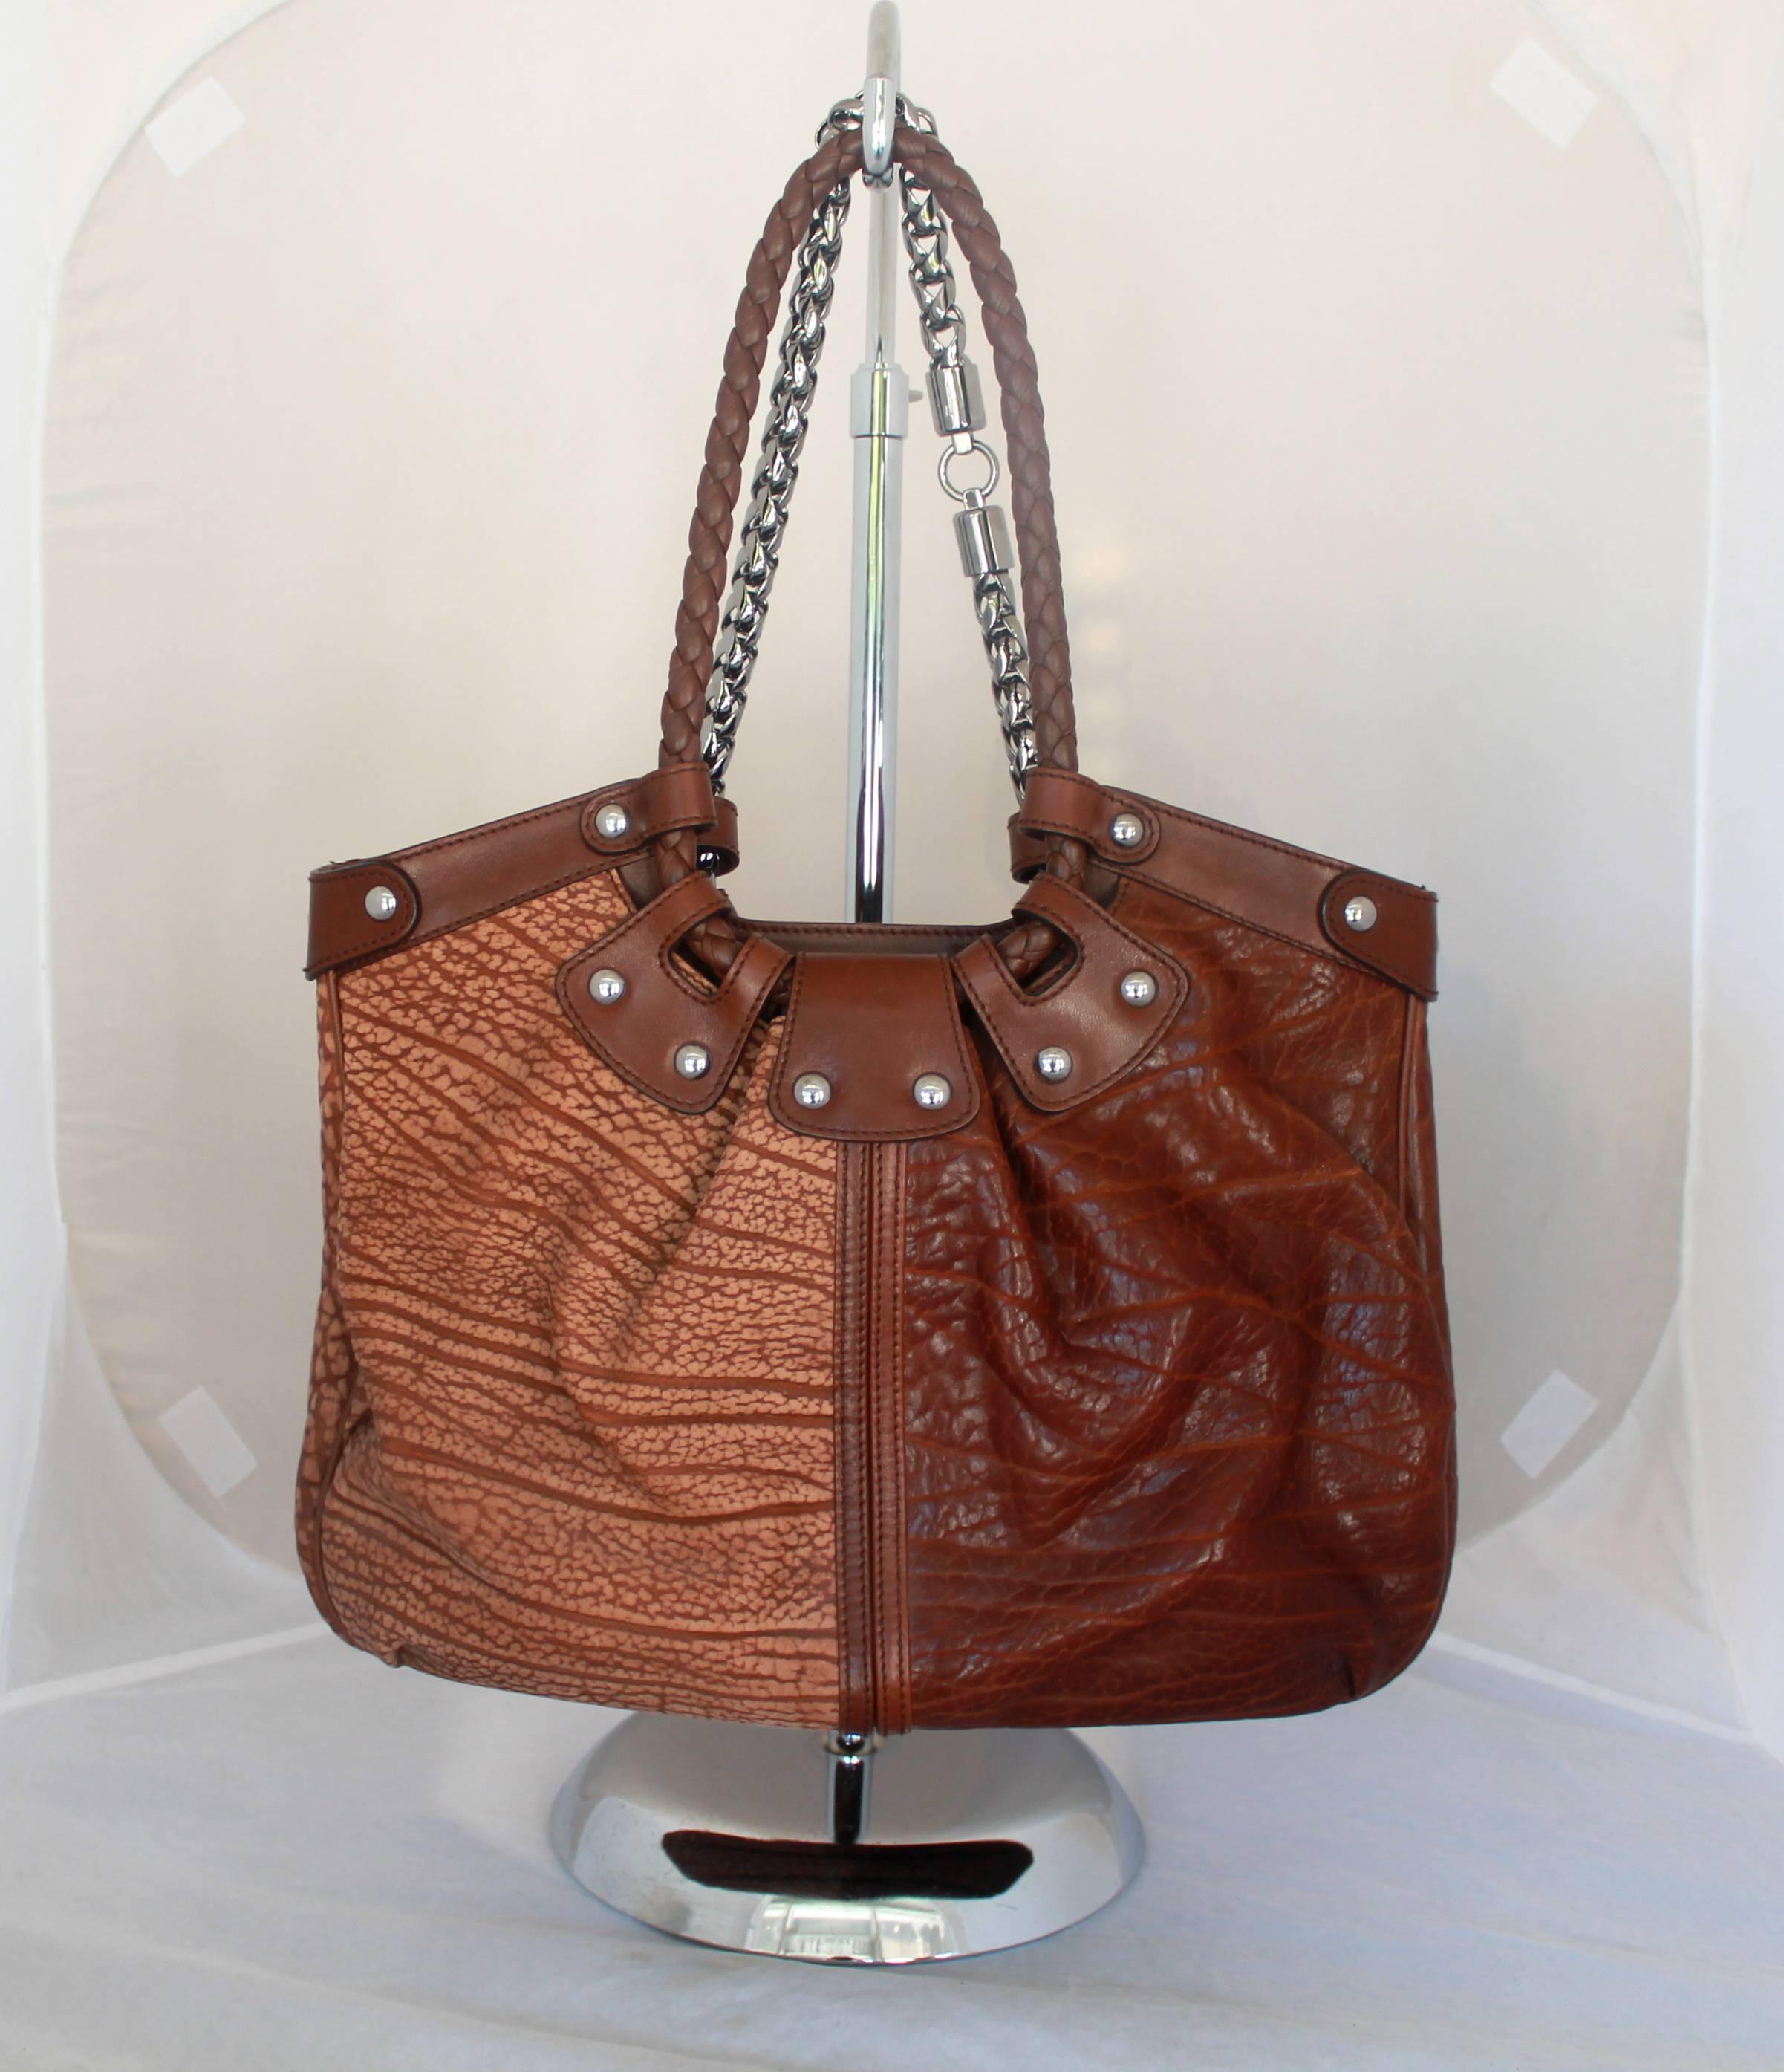 Salvatore Ferragamo Two-Toned Brown Leather Should Bag - SHW

This shoulder bag is in excellent condition. One side of the bag is dark brown and the other is light brown. One strap is braided leather and the other is chain. There are silver studs